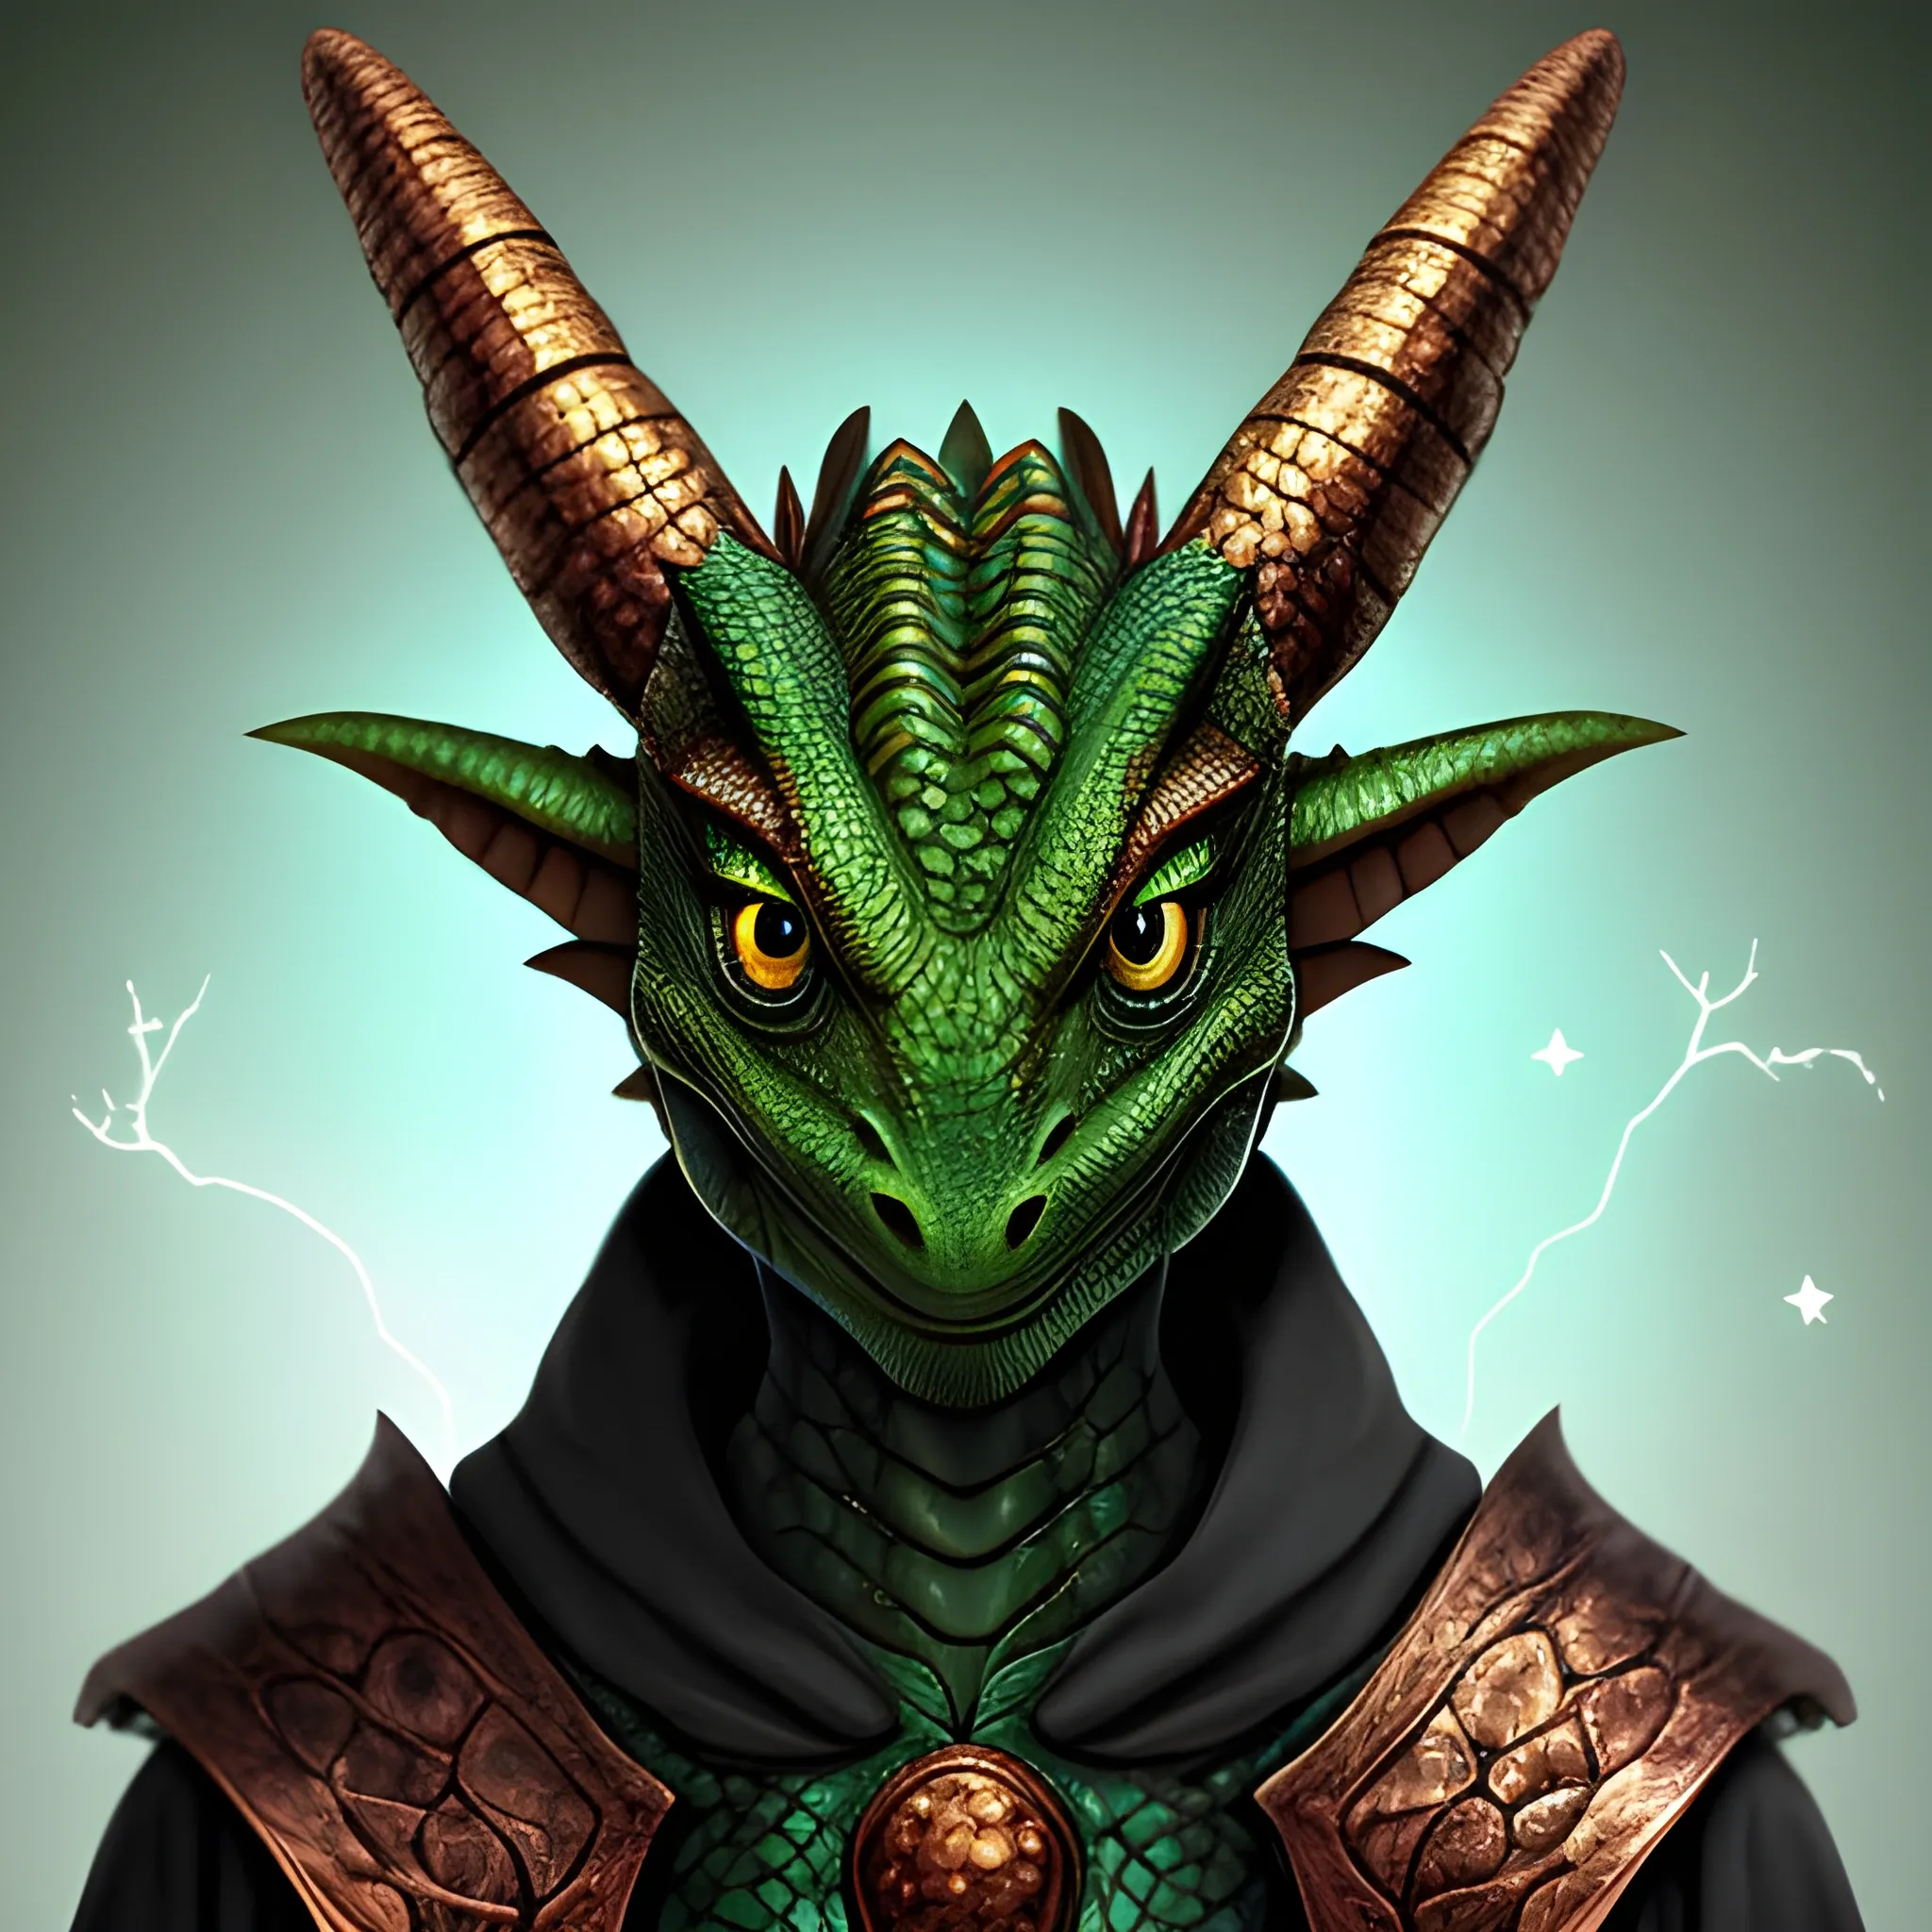 Humanoid dragon looking at the camera. He is copperd colored with green eyes. He is wearing a simple cloak that has stars on it. He does not have horns, and has a more lizard like face. Fantasy